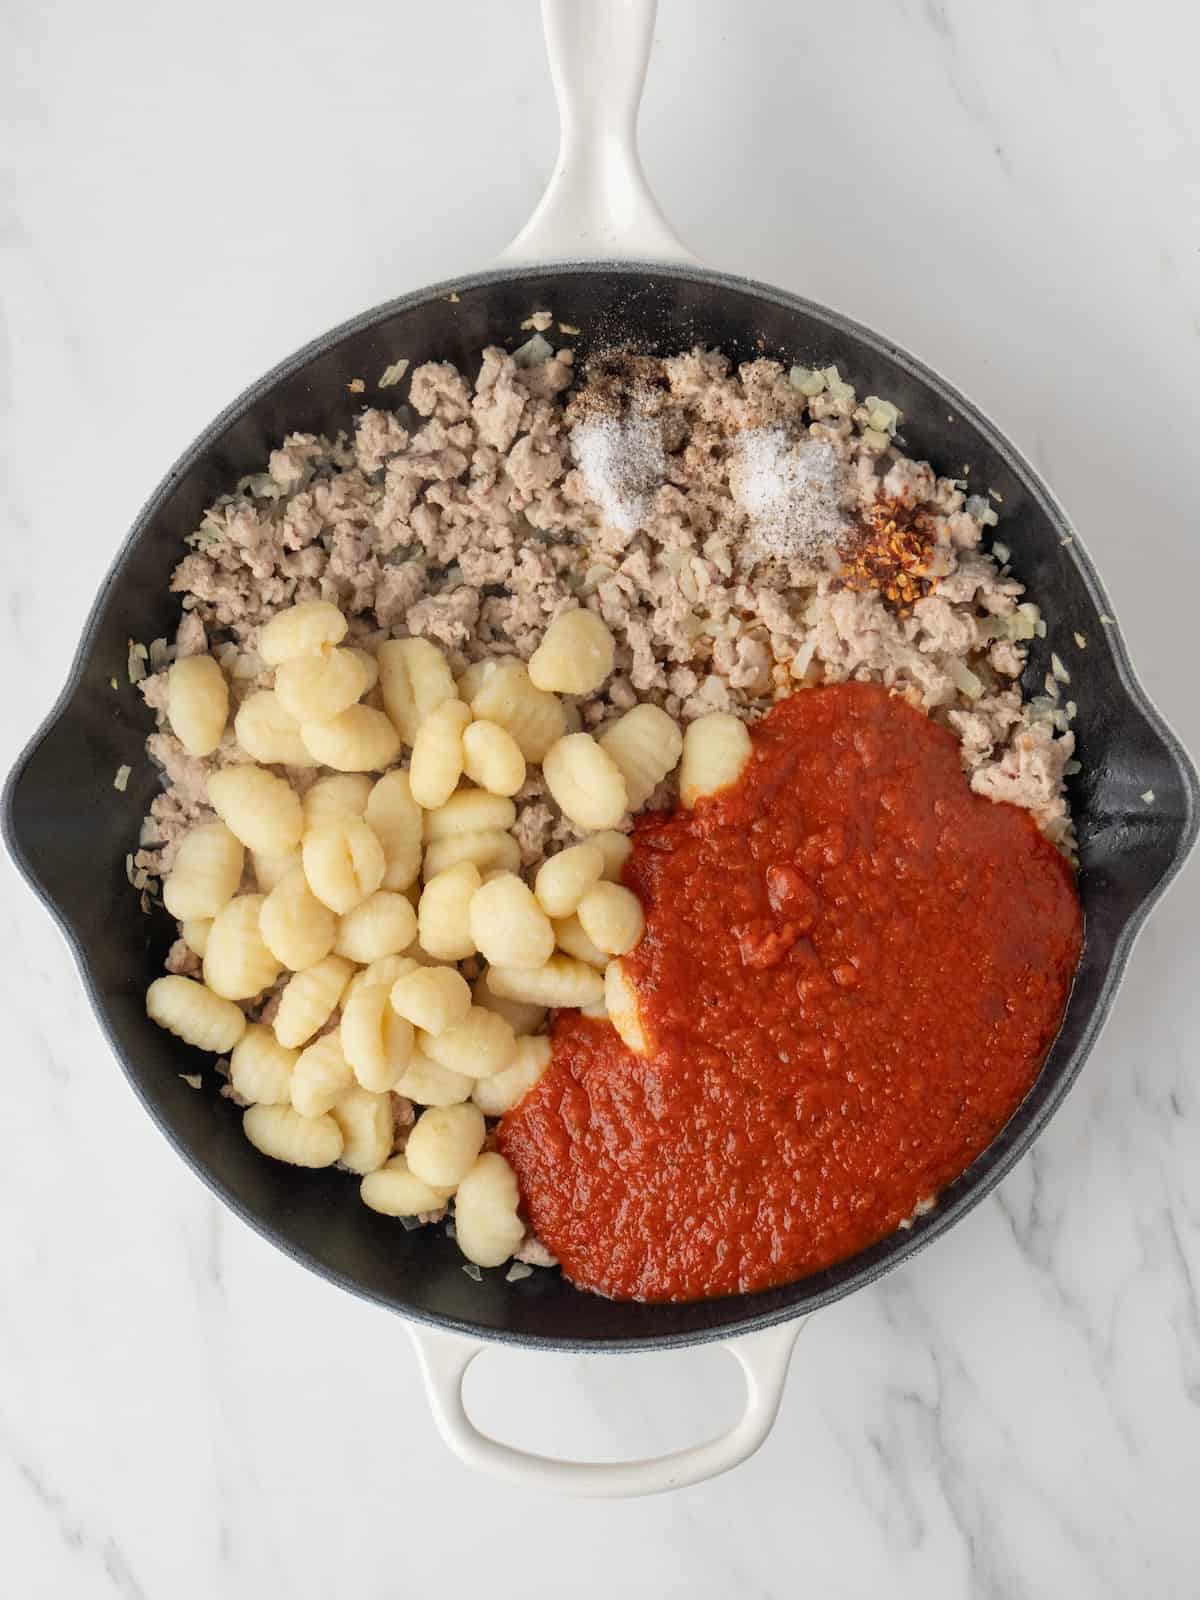 A skillet with ground chicken being cooked, and cooked gnocchi, marinara sauce and salt, pepper and red peper flakes just added.